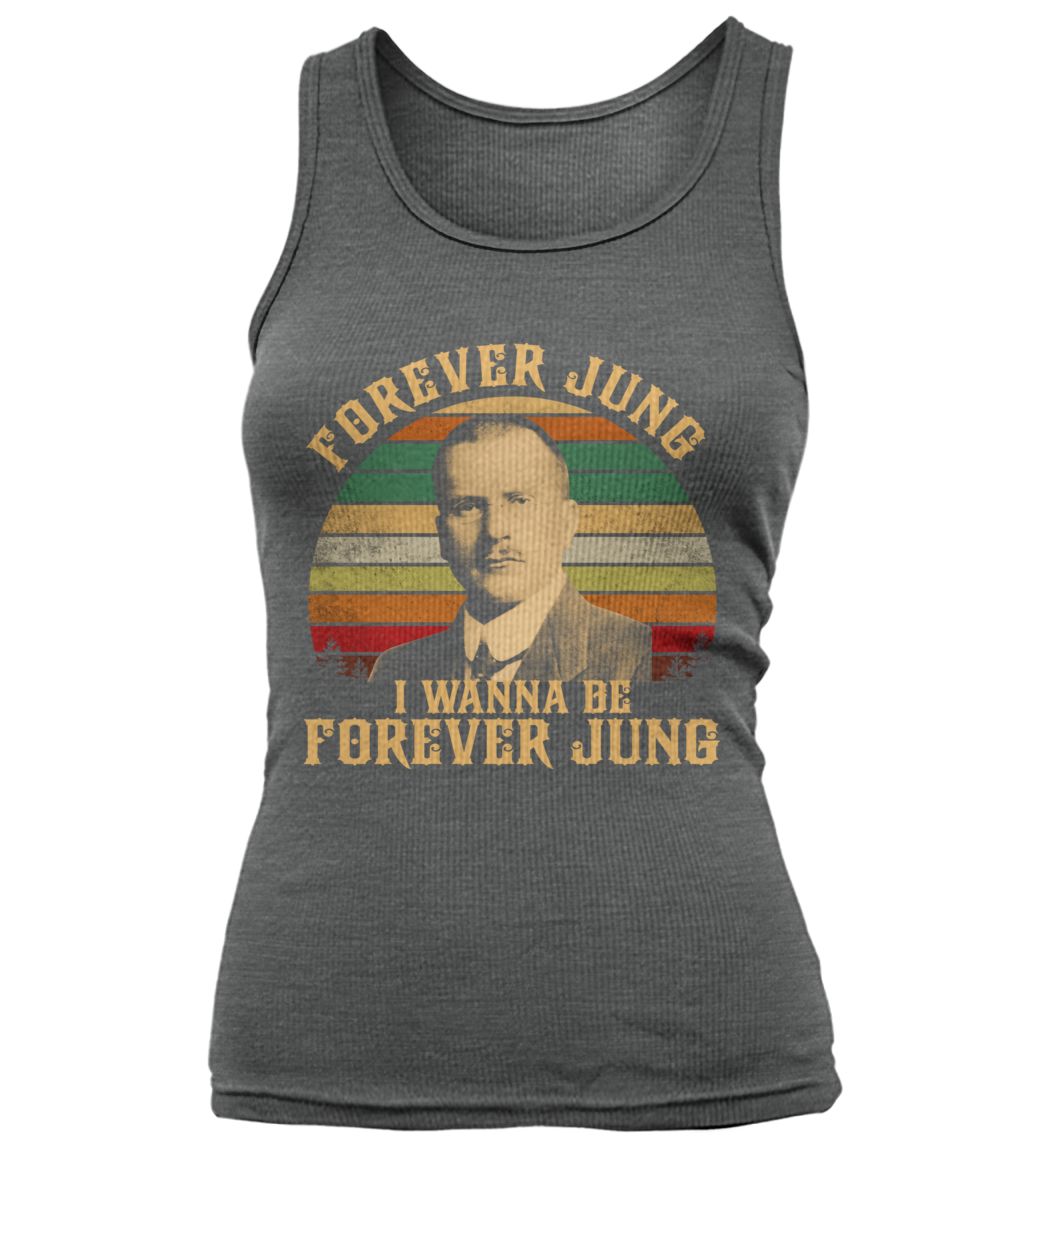 Vintage forever jung I wanna be forever jung women's tank top